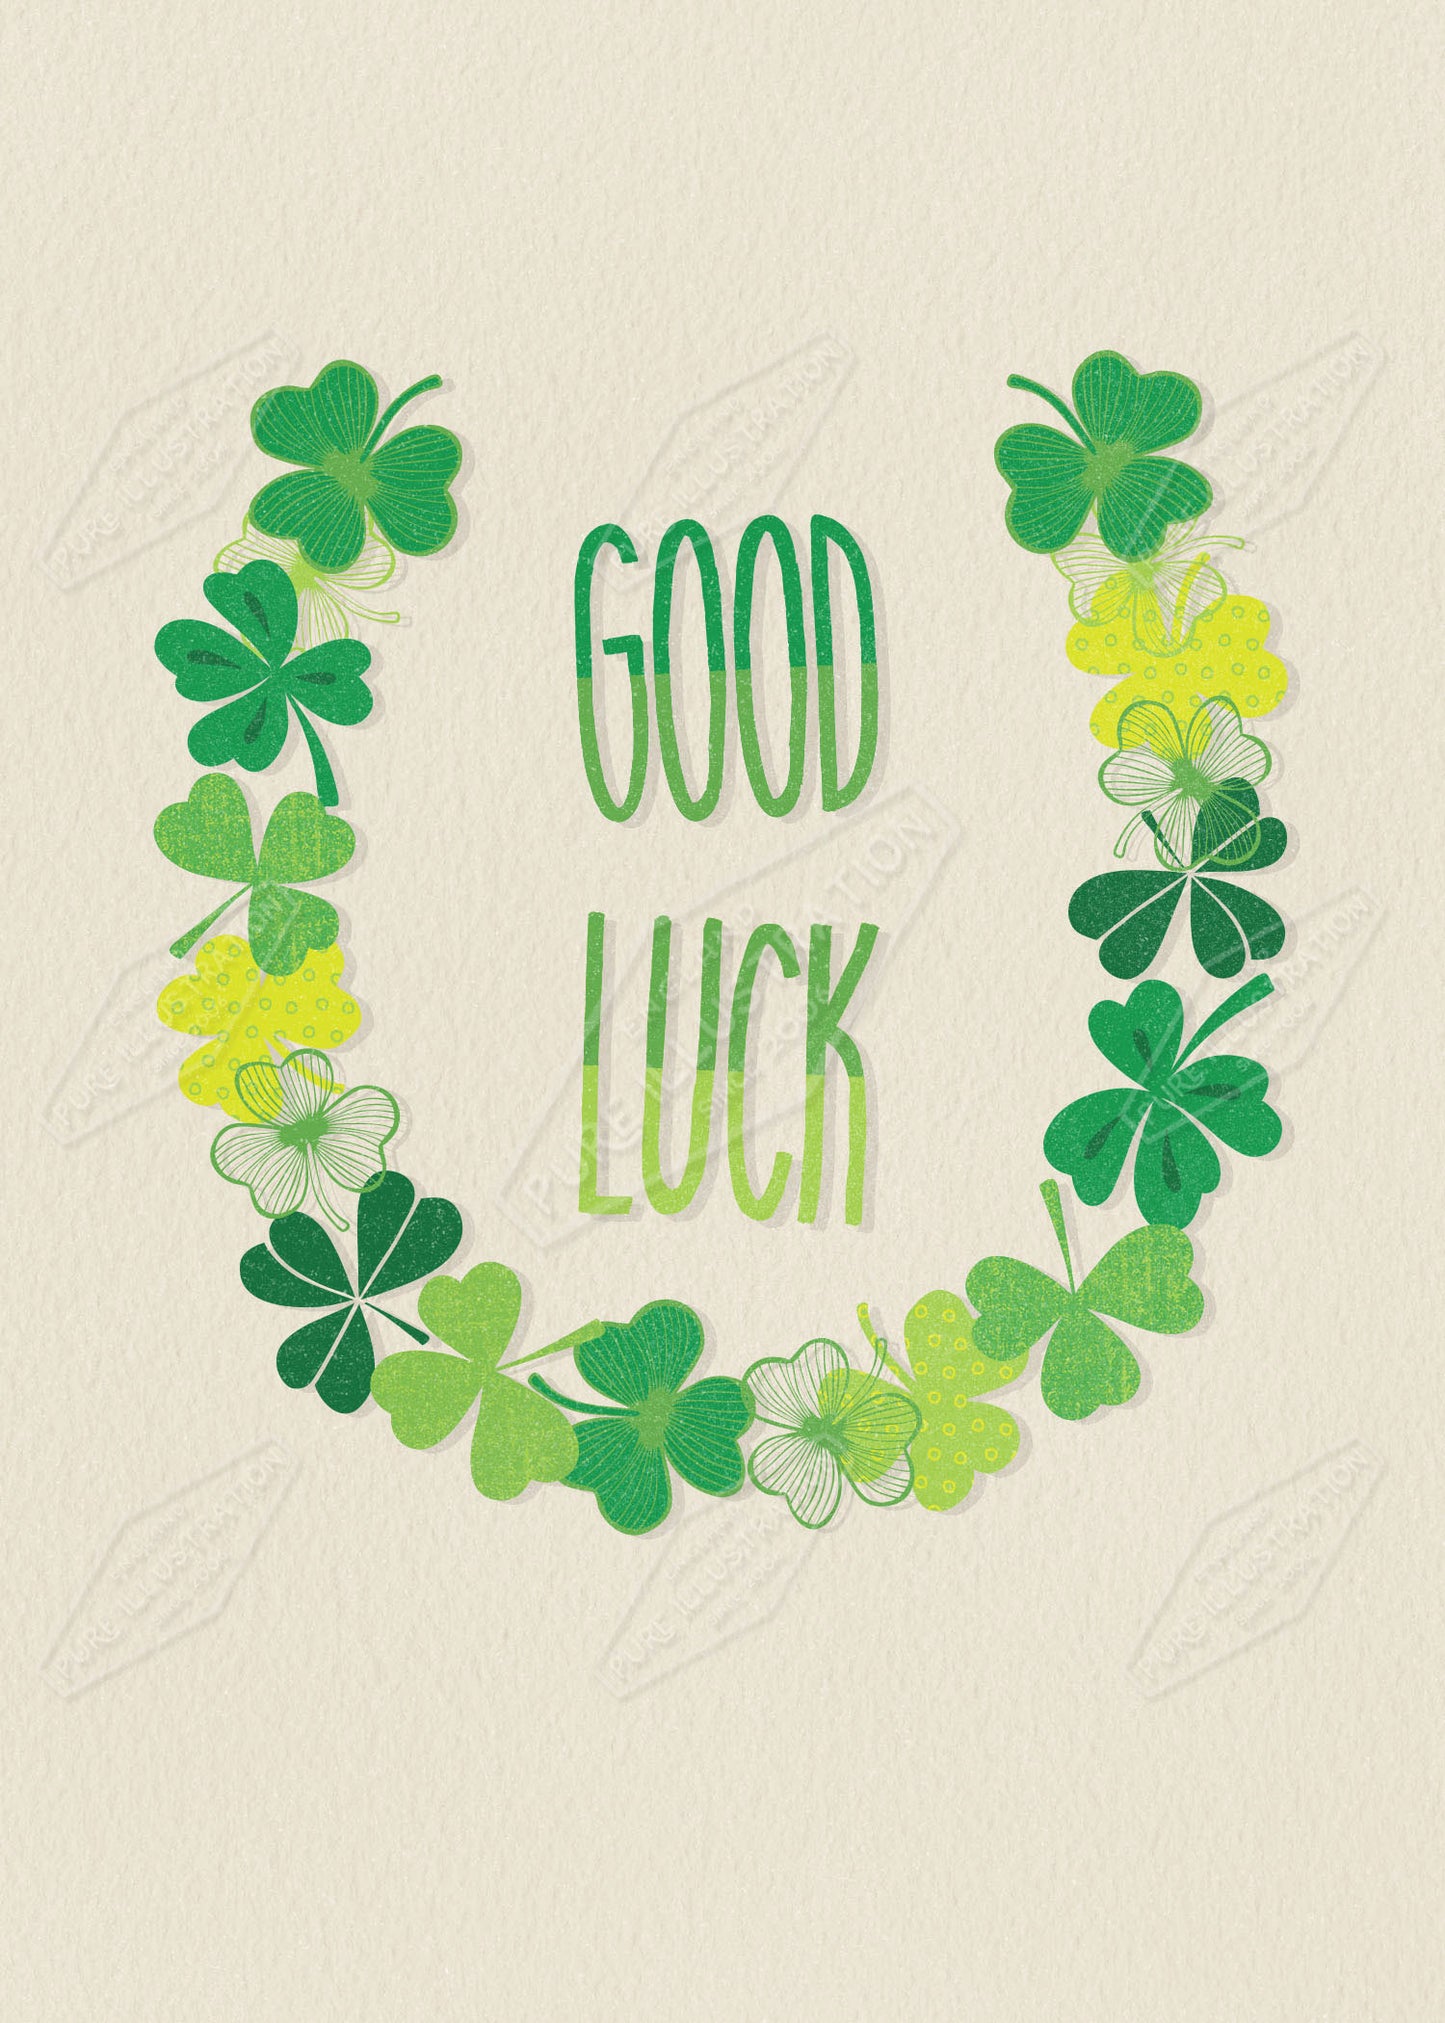 00034987GEG- Gill Eggleston is represented by Pure Art Licensing Agency - Good Luck Greeting Card Design